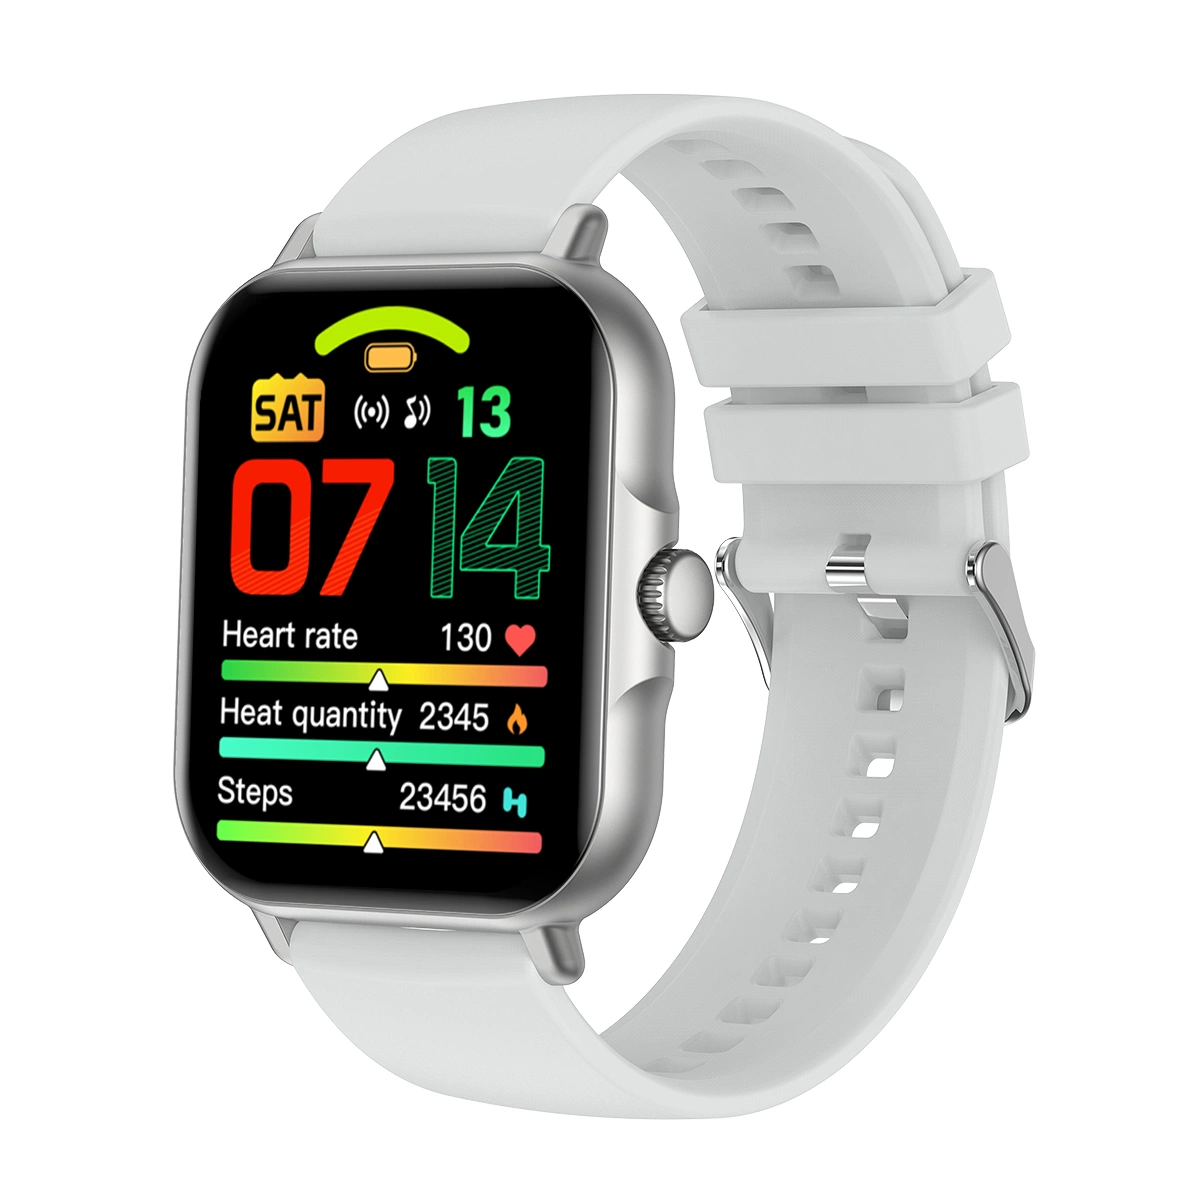 Touch Screen Digital Wrist Smart Watch for Android Apple Ios Mobile Phone Watch Wholesale Fashion Sport Gift Smart Watch Price